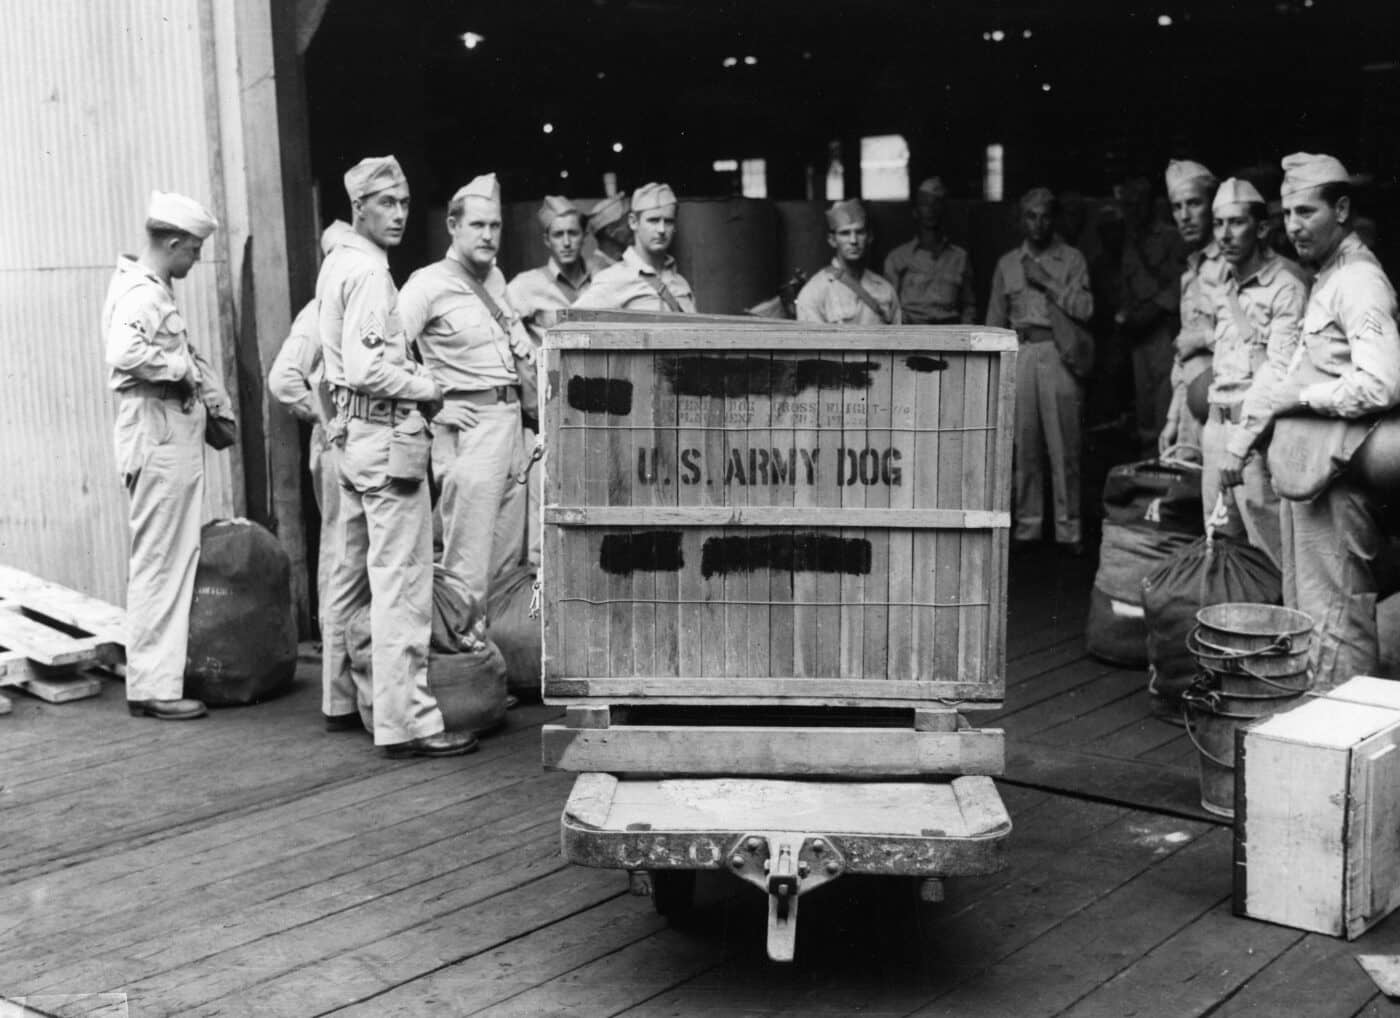 US Army dog crate